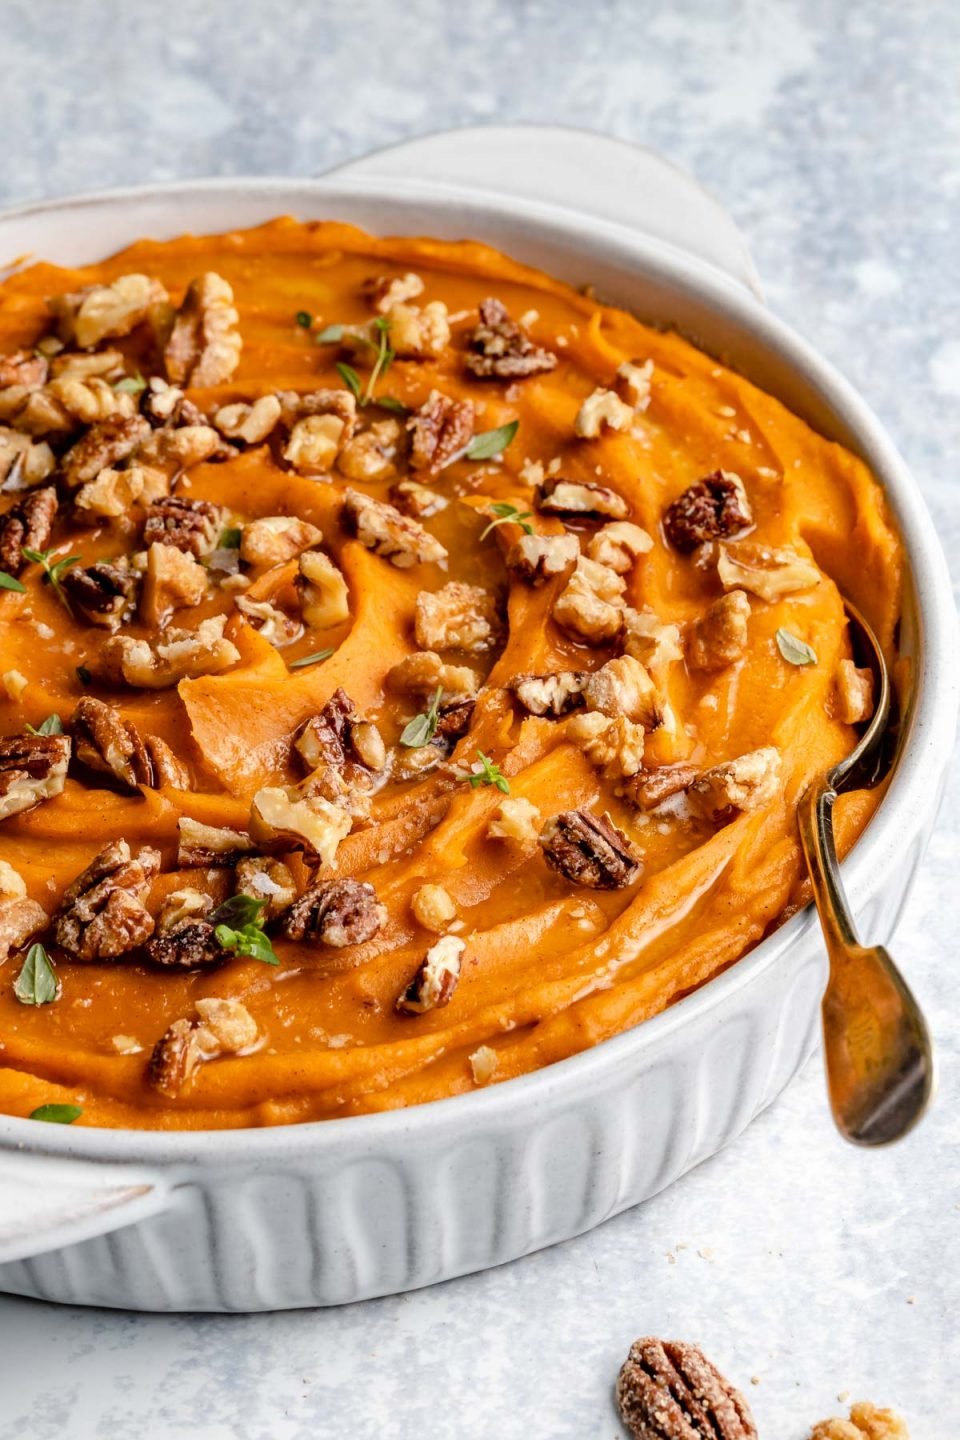 Easy Sweet Potato Casserole in a white serving dish sprinkled with fresh herbs and candied nuts with a silver spoon nestled into the dish. The baking dish rests on a flat marbled gray surface.